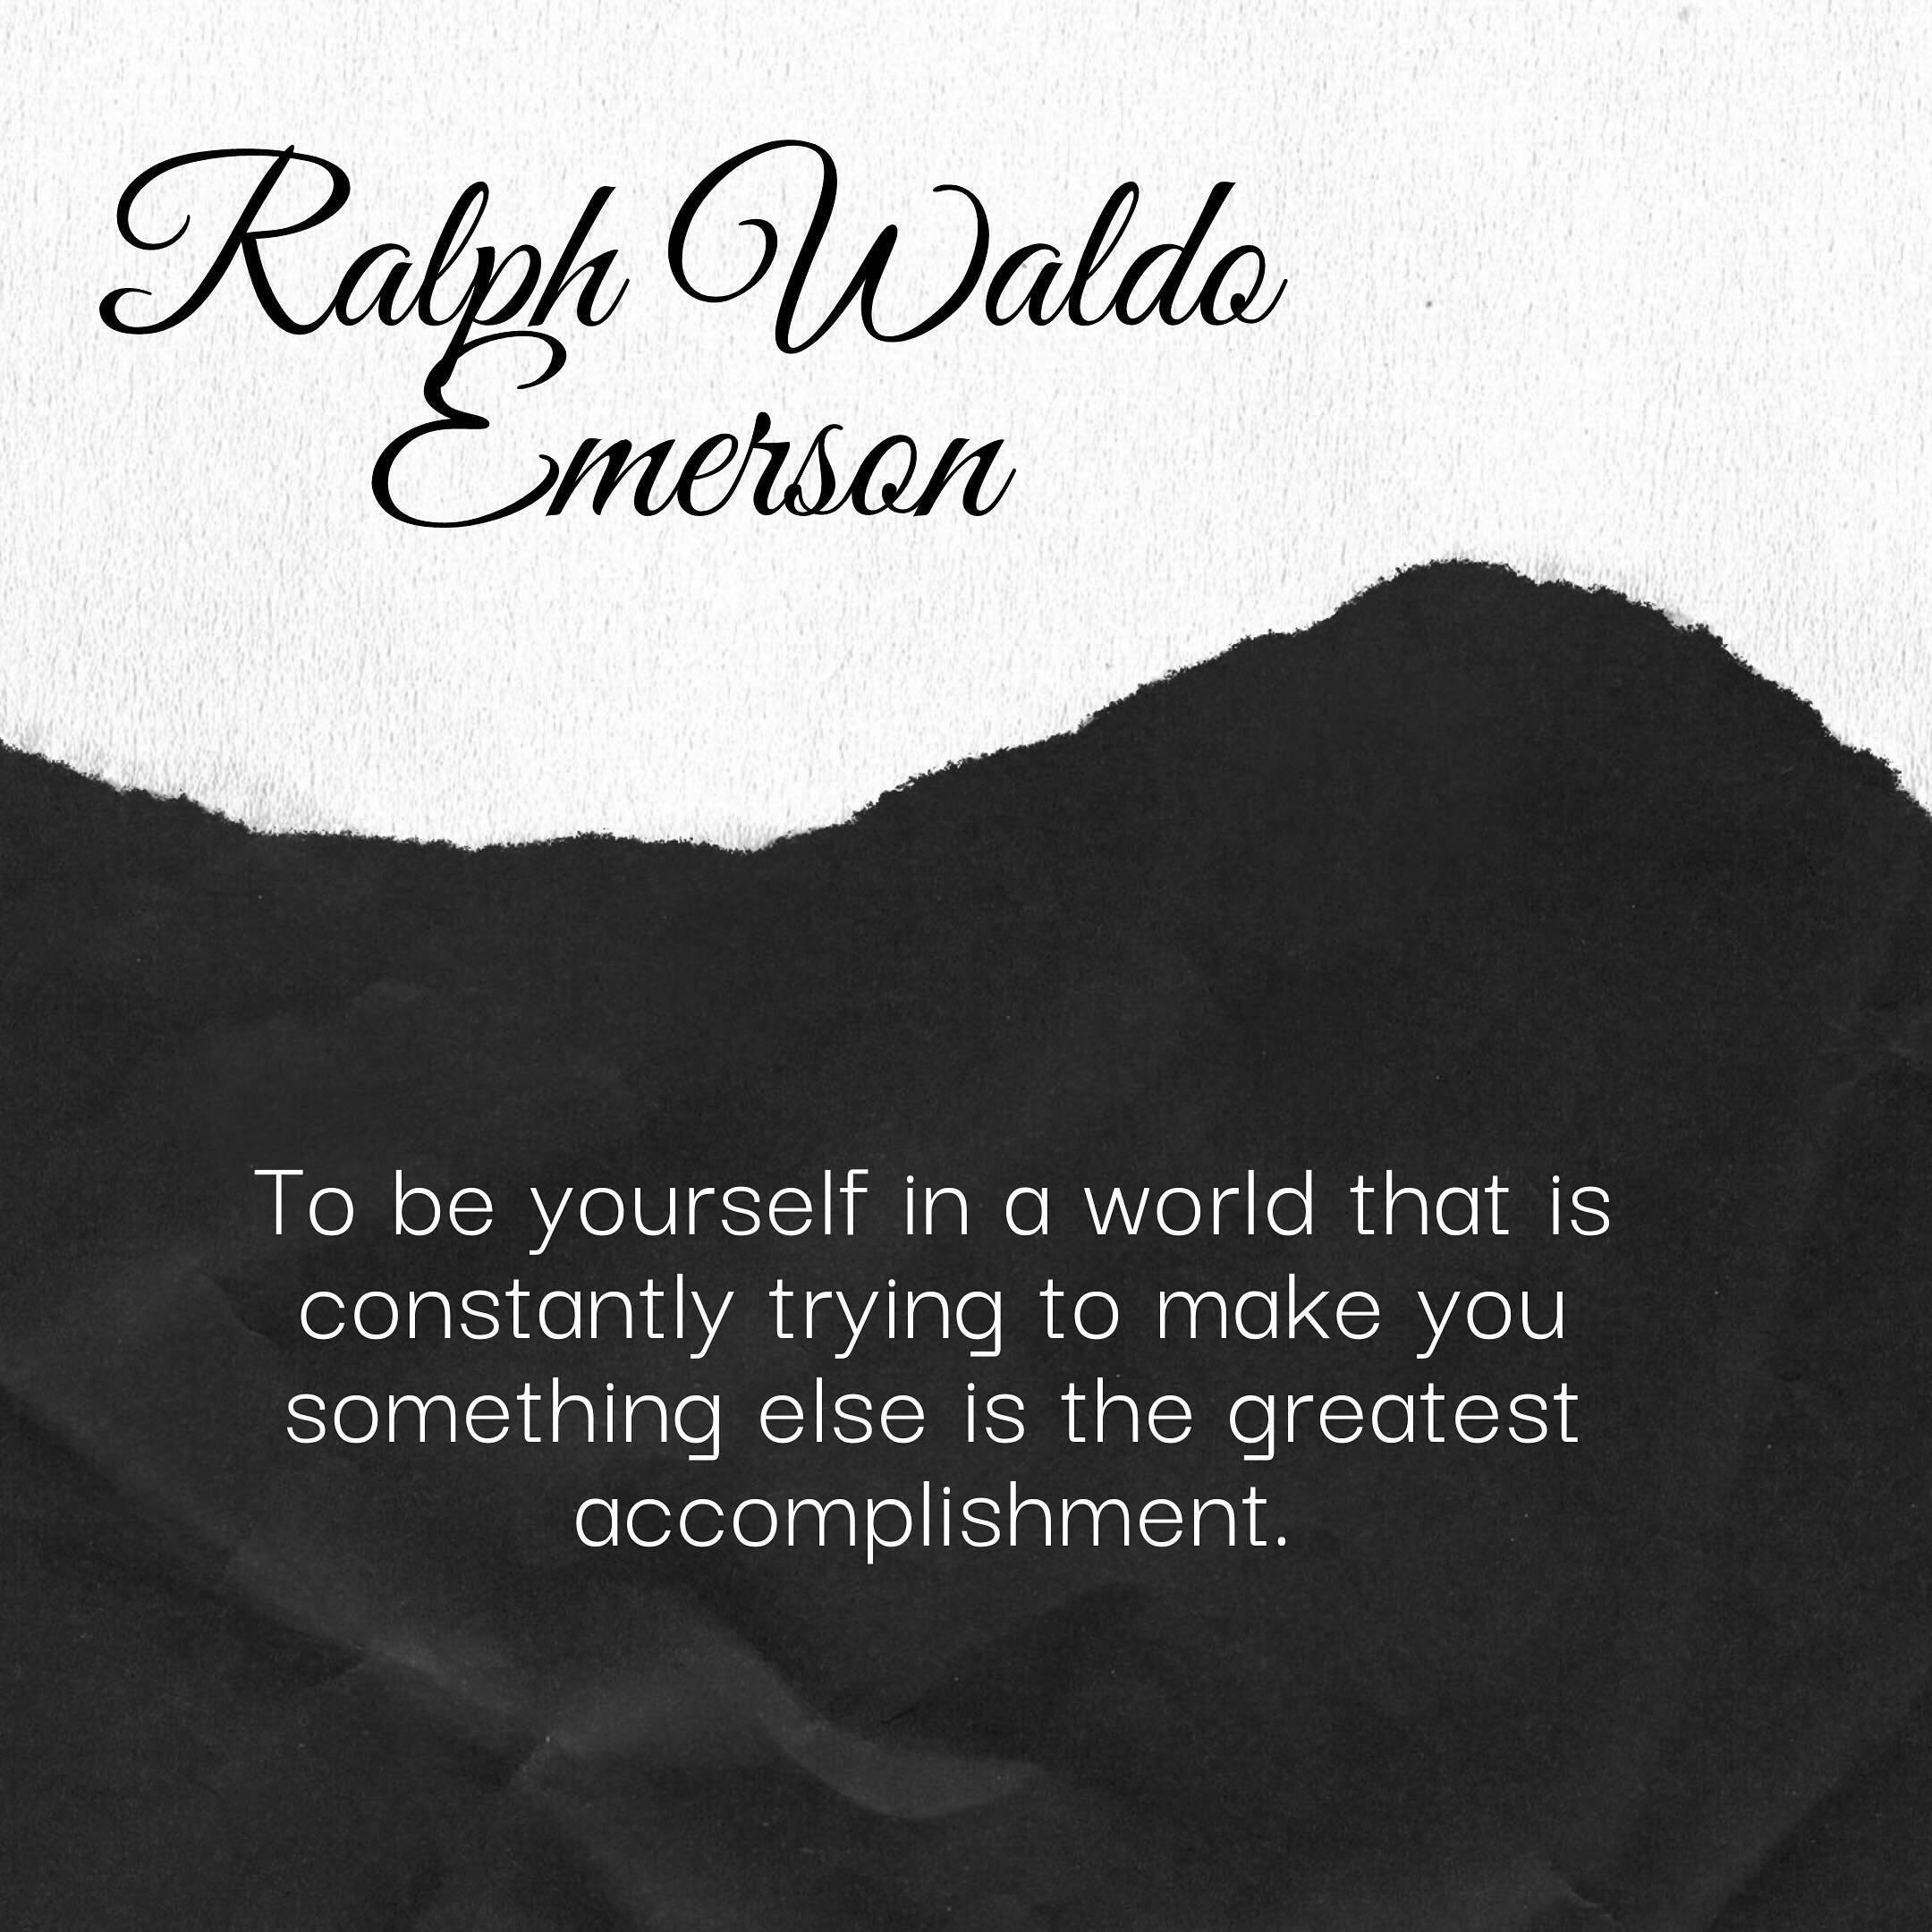 The mission of Dialogical Persona Healing Arts is the transformation, embodiment and authentic expression of who you are, so you can have more personal power, confidence and trust in yourself and in the world. 

#dialogicalpersona #ralphwaldoemerson 